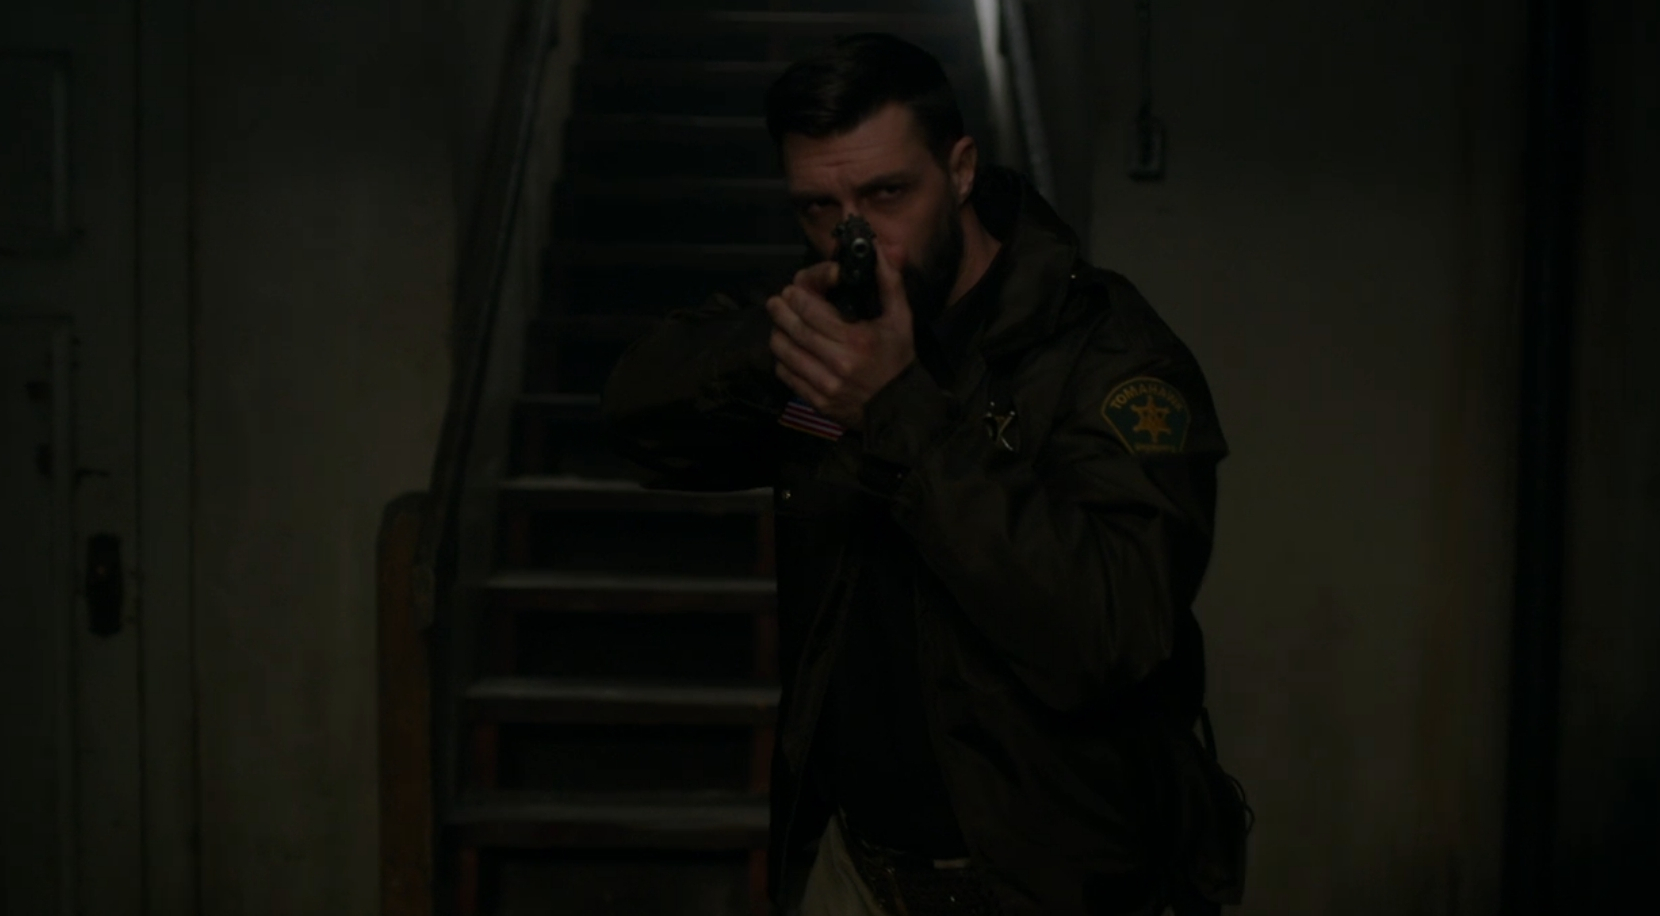 Sheriff Bishop employs the C.A.R. technique as he searches a basement in "The Memory Remains" (S12E18).